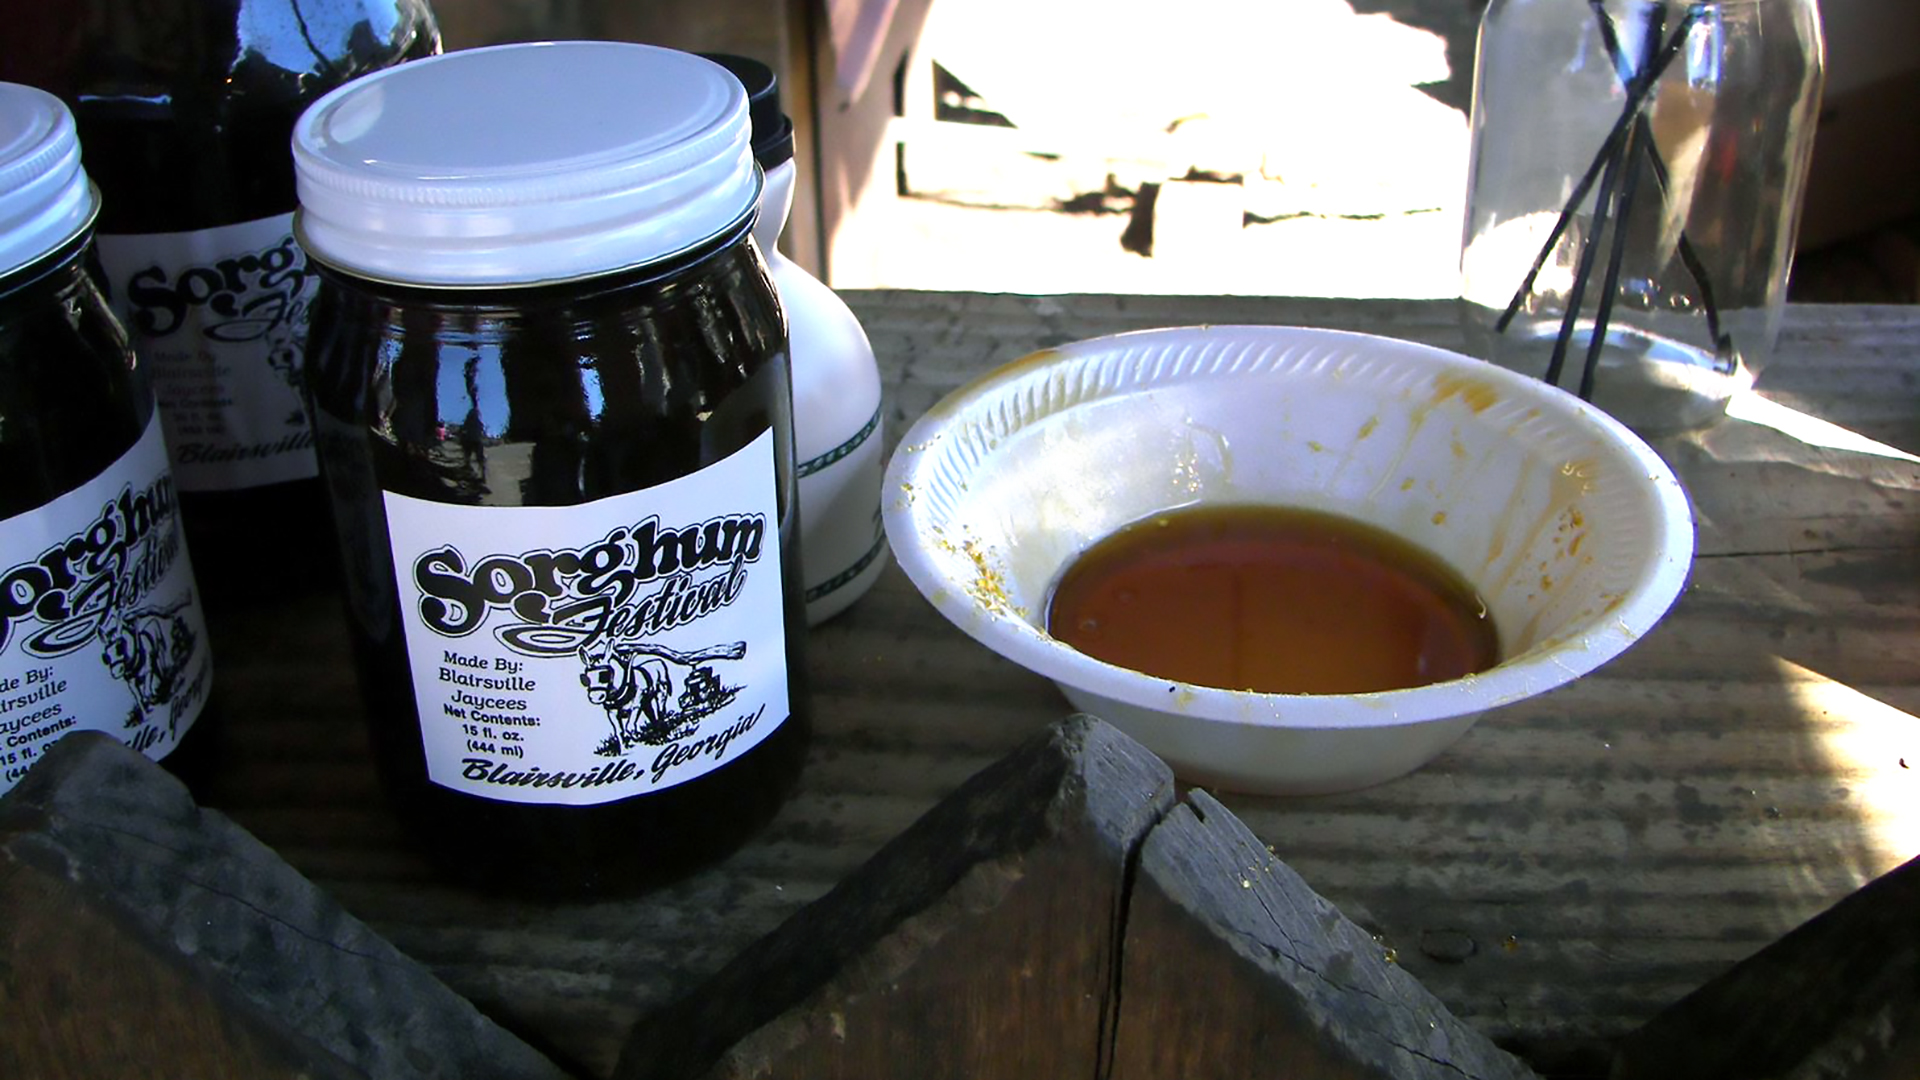 Then the finished sorghum syrup goes on sale immediately after it's made. (Photograph by Bill Boemanns)